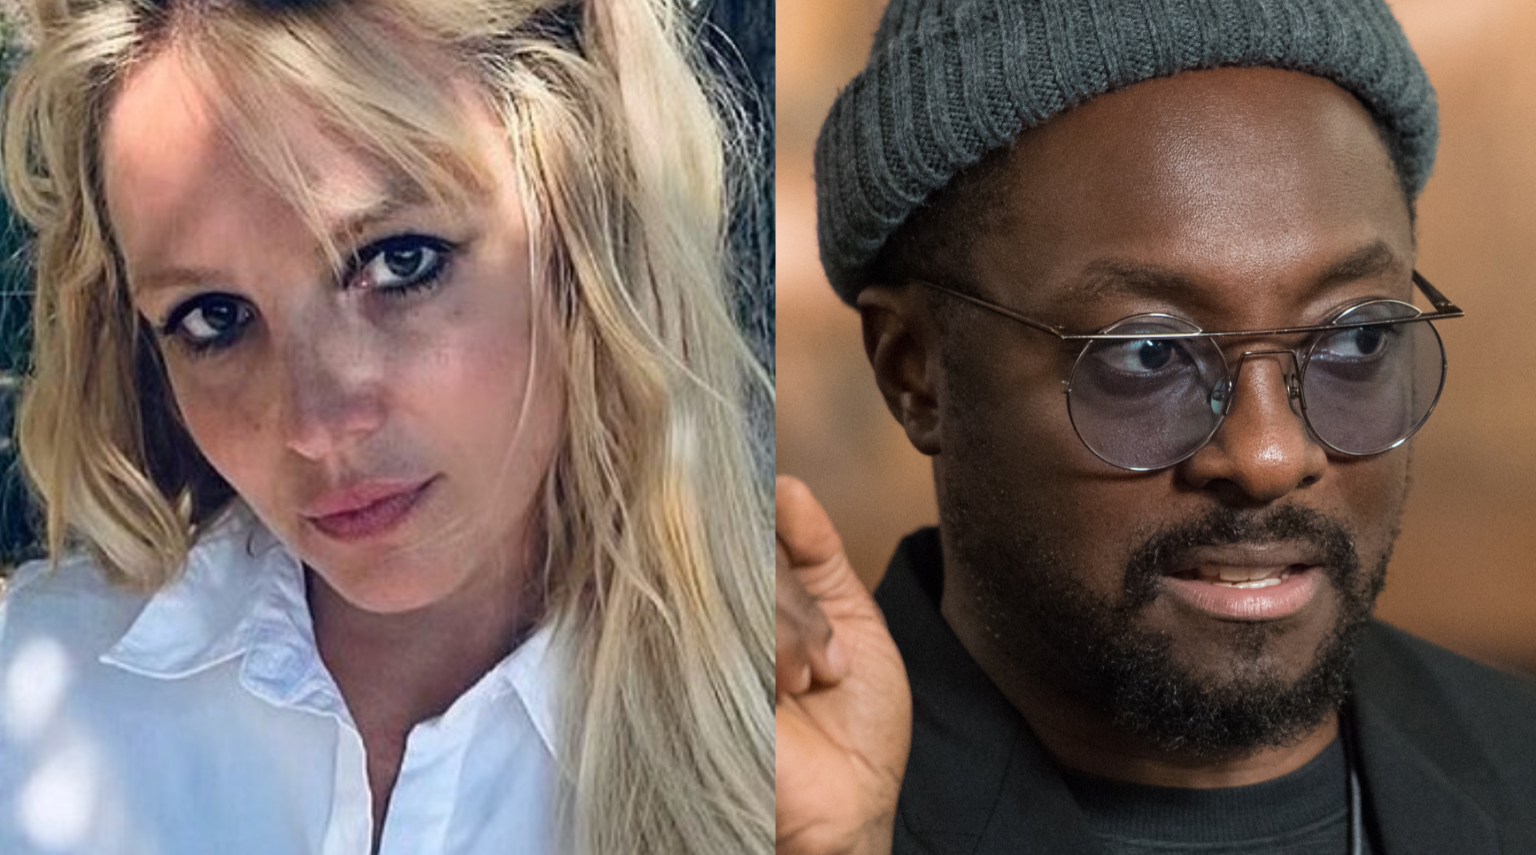 Britney Spears and Will.i.am's new song drops Friday, not Wednesday